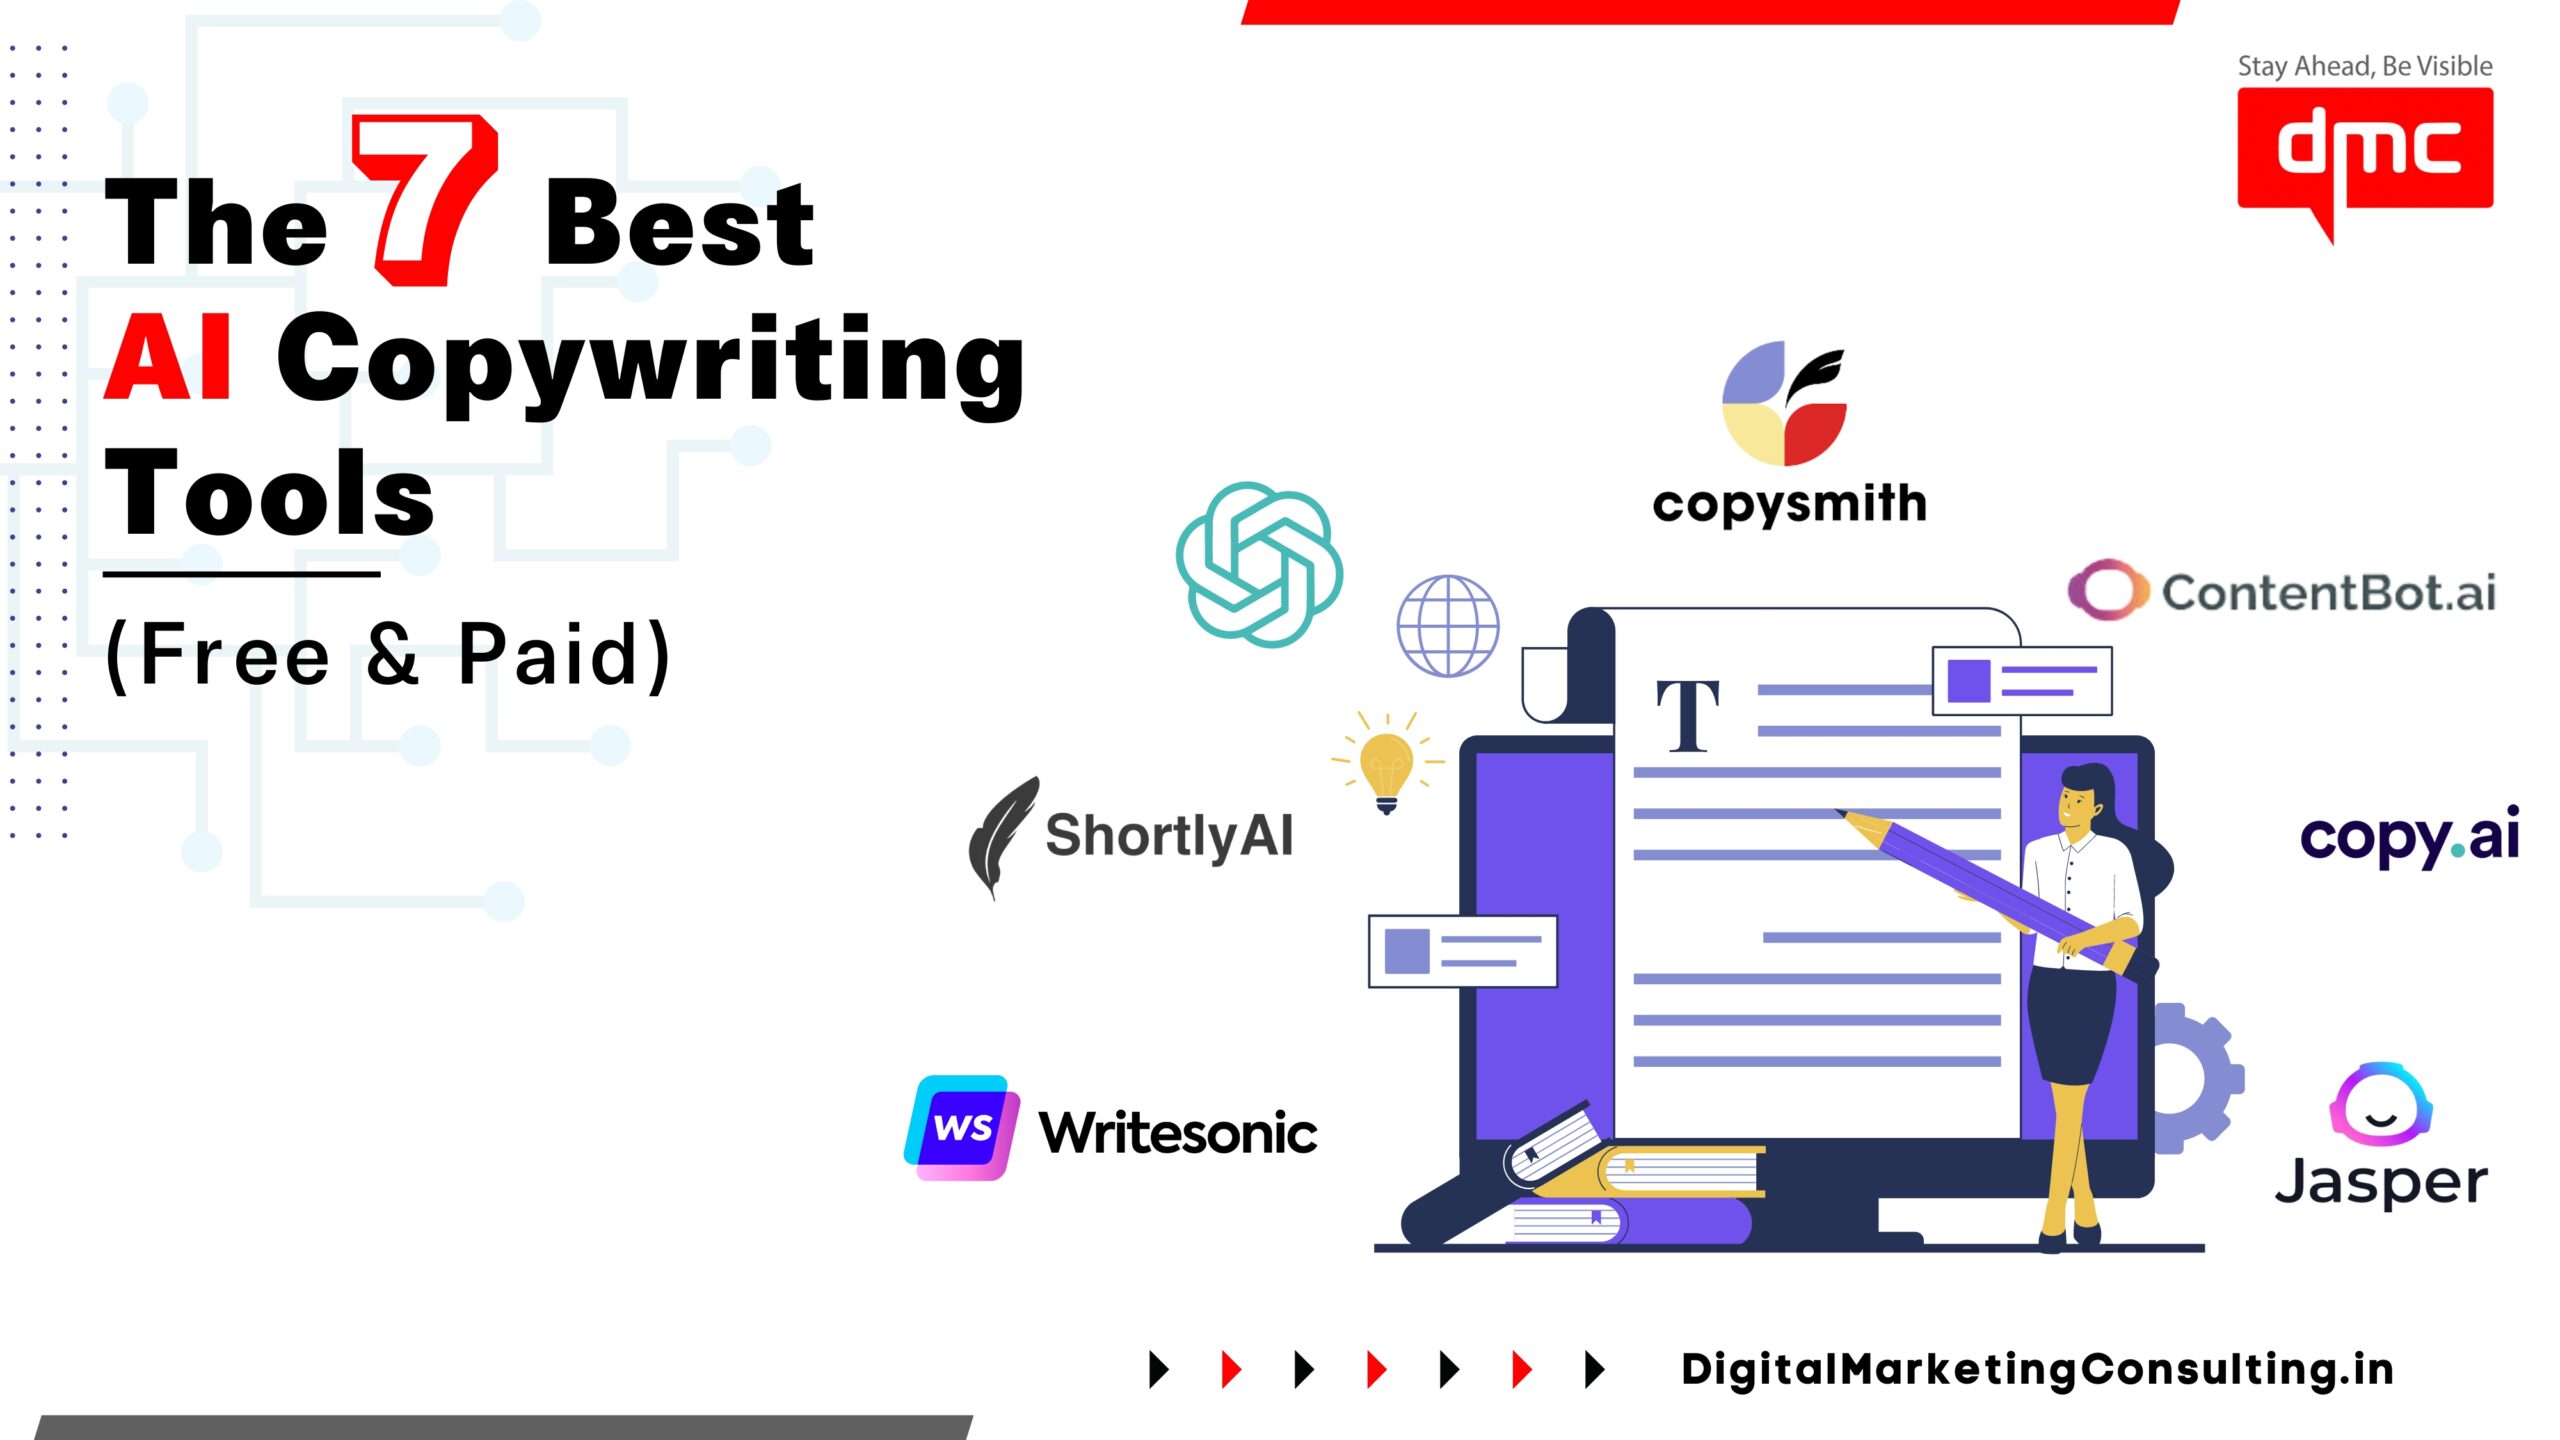 The 7 Best AI Copywriting Tools (Free & Paid)